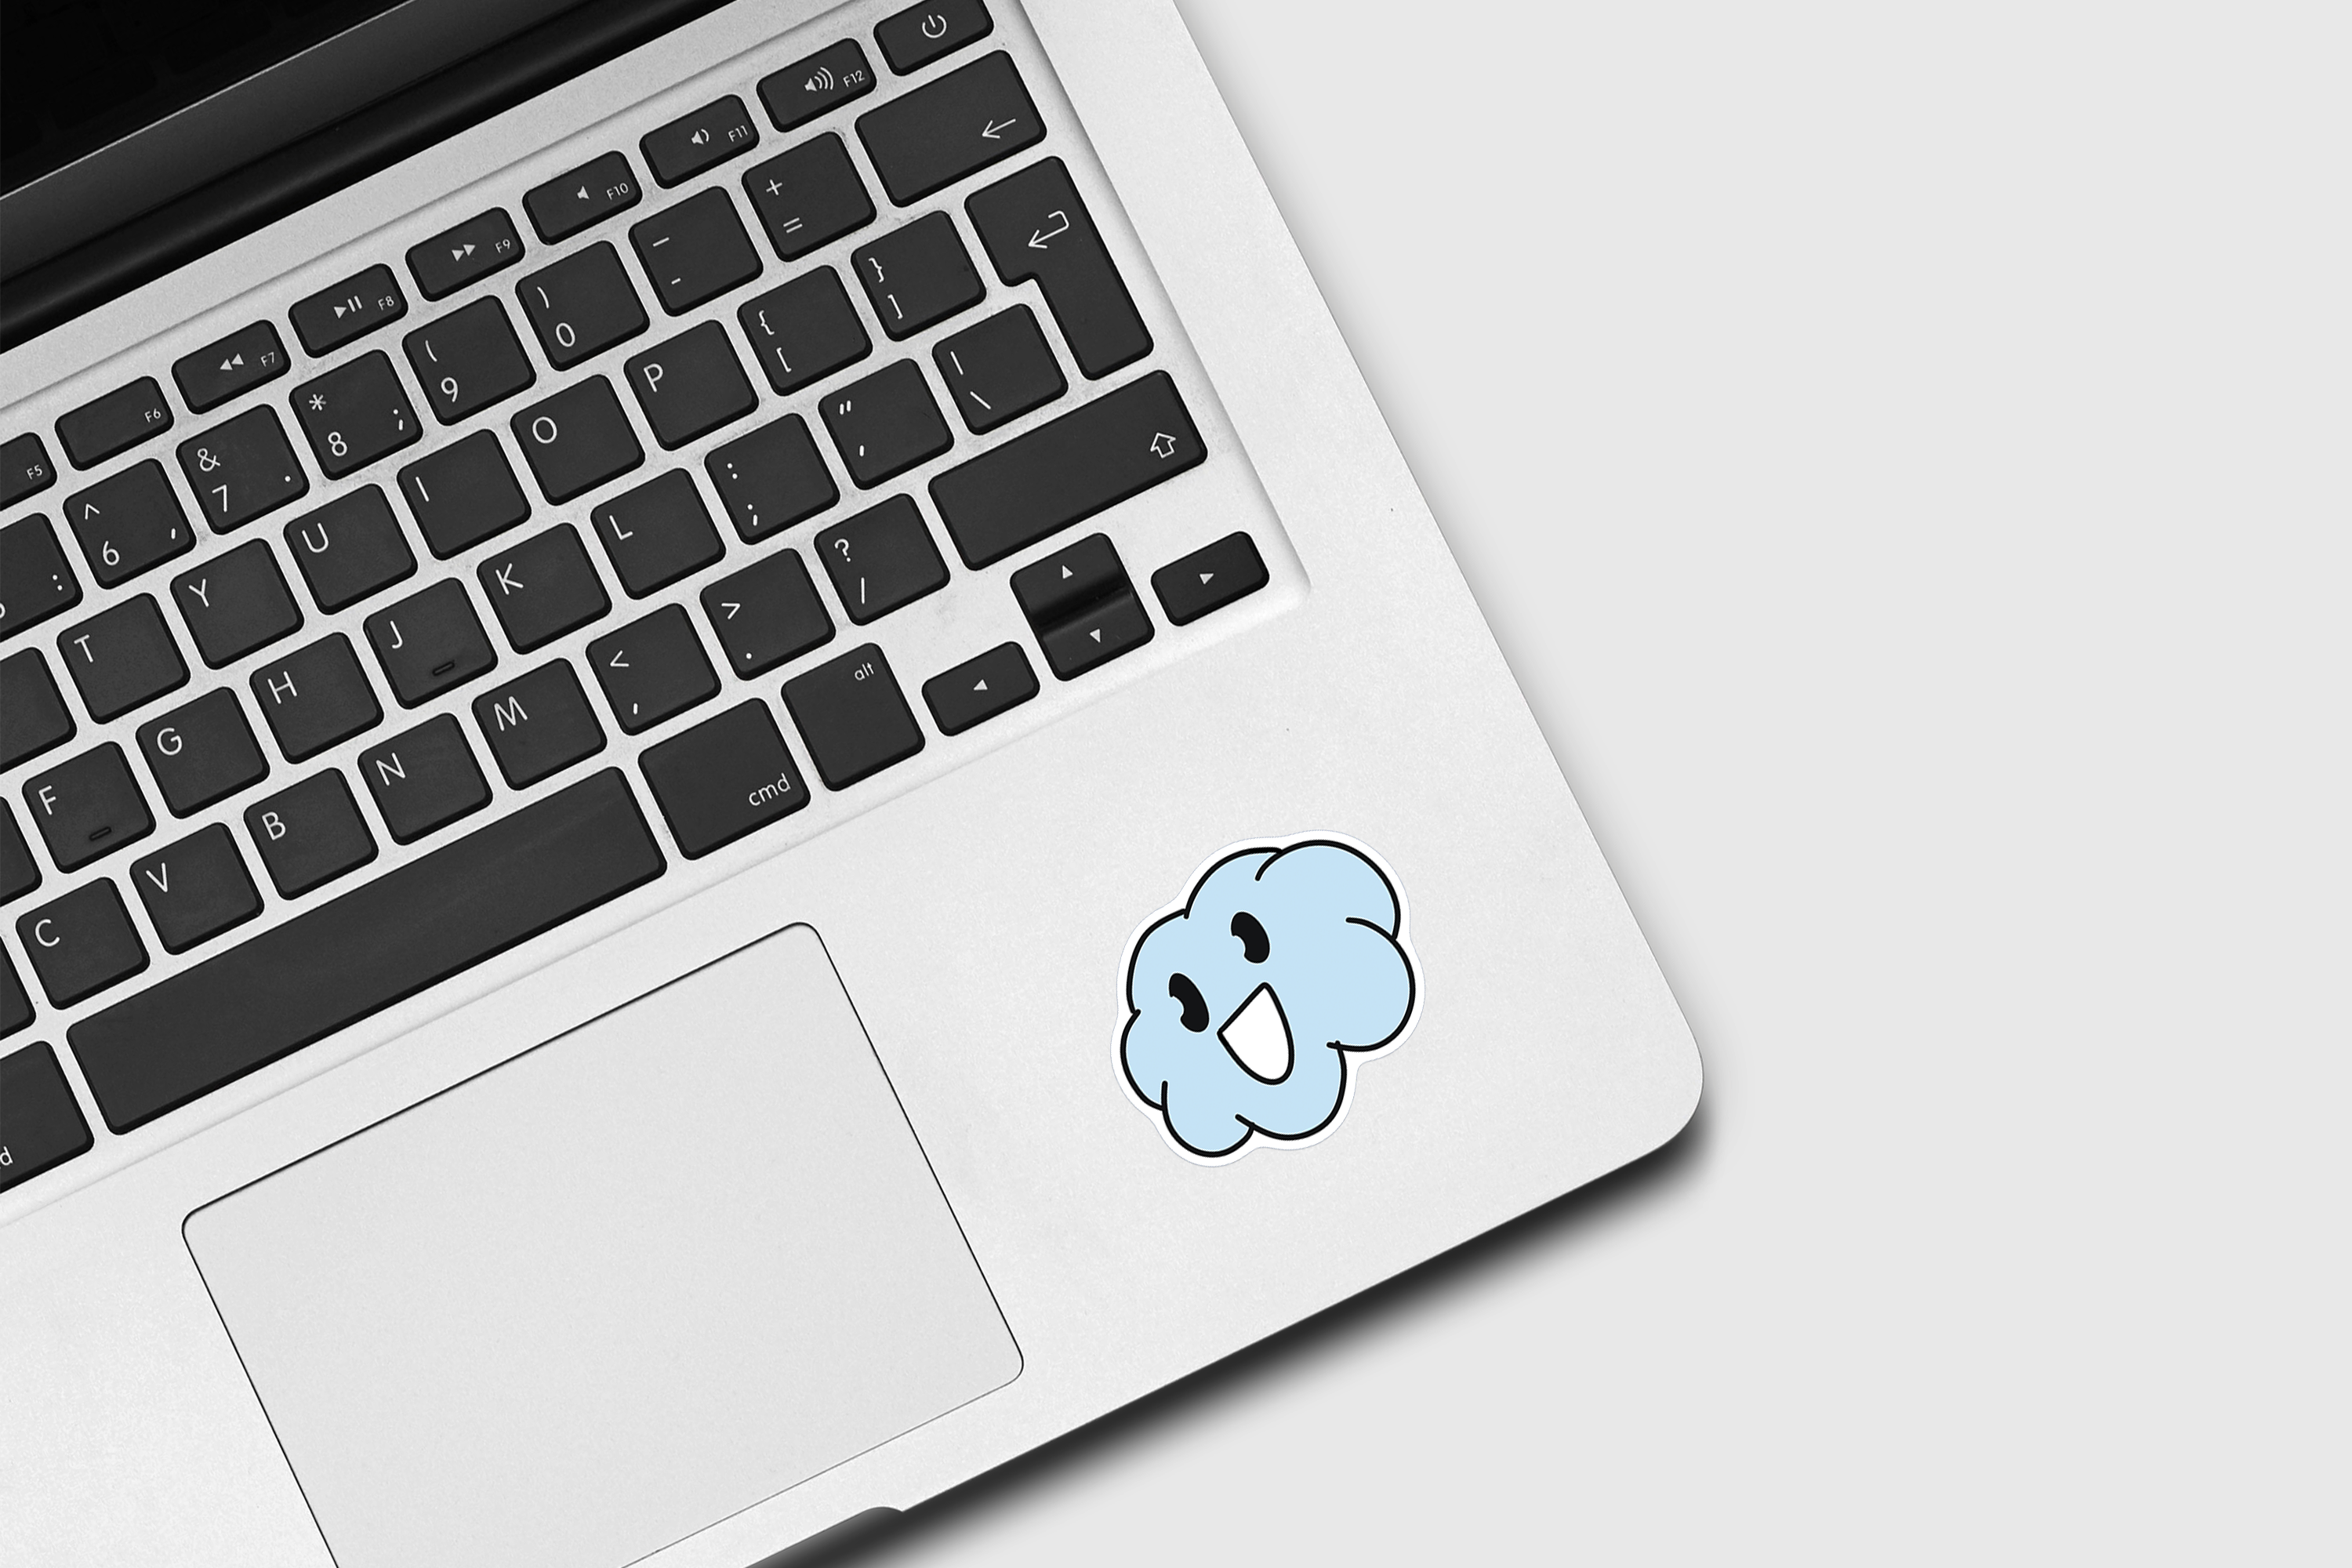 Cloud Sticker, Clouds Stickers, Stickers for laptop, Weather Proof